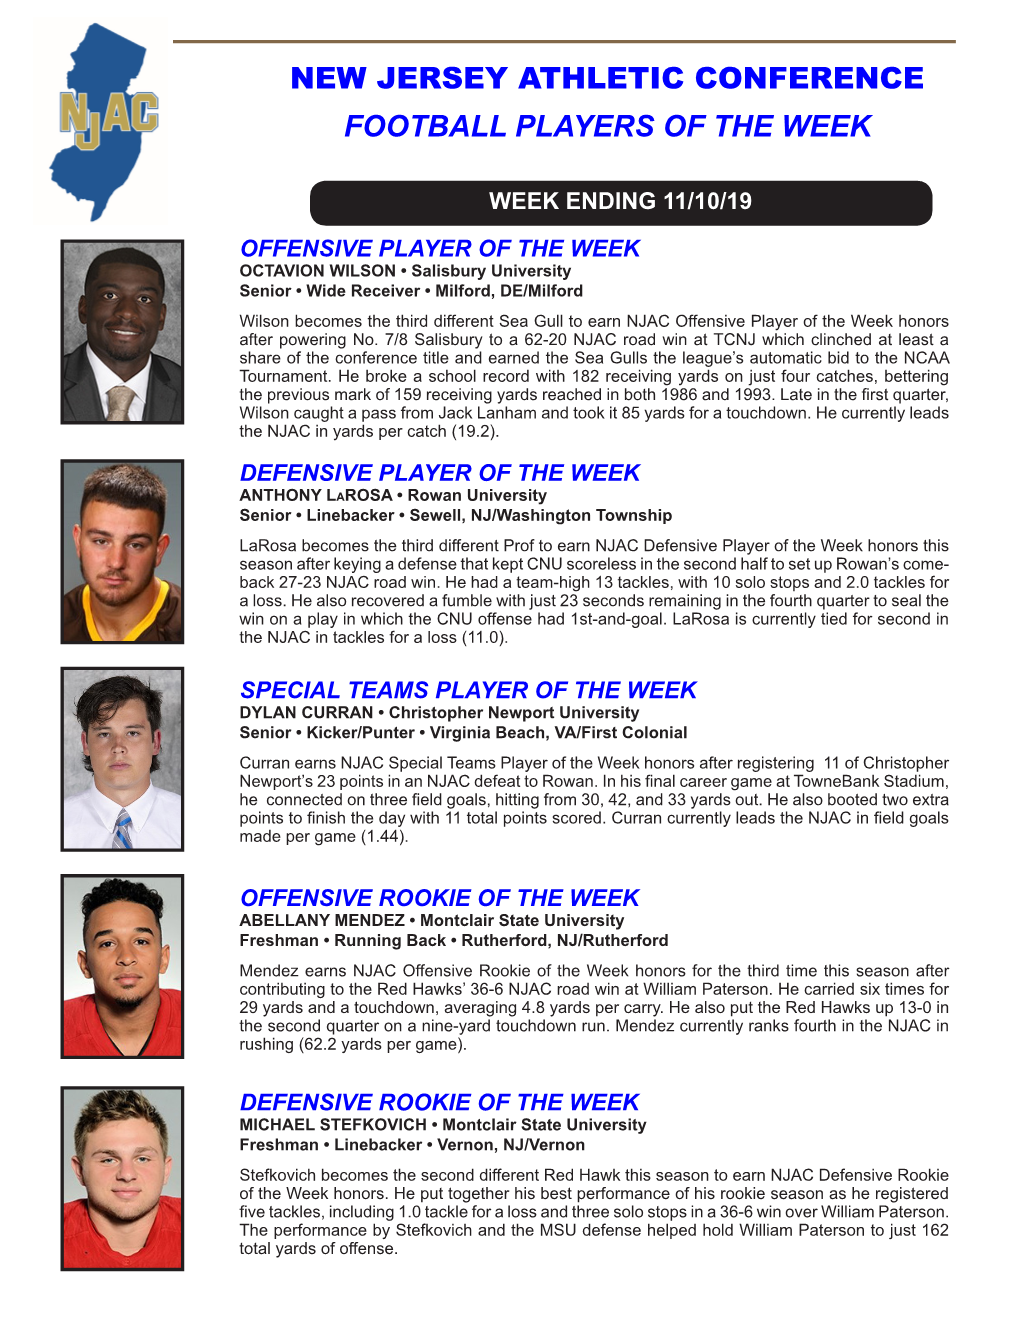 New Jersey Athletic Conference Football Players of the Week